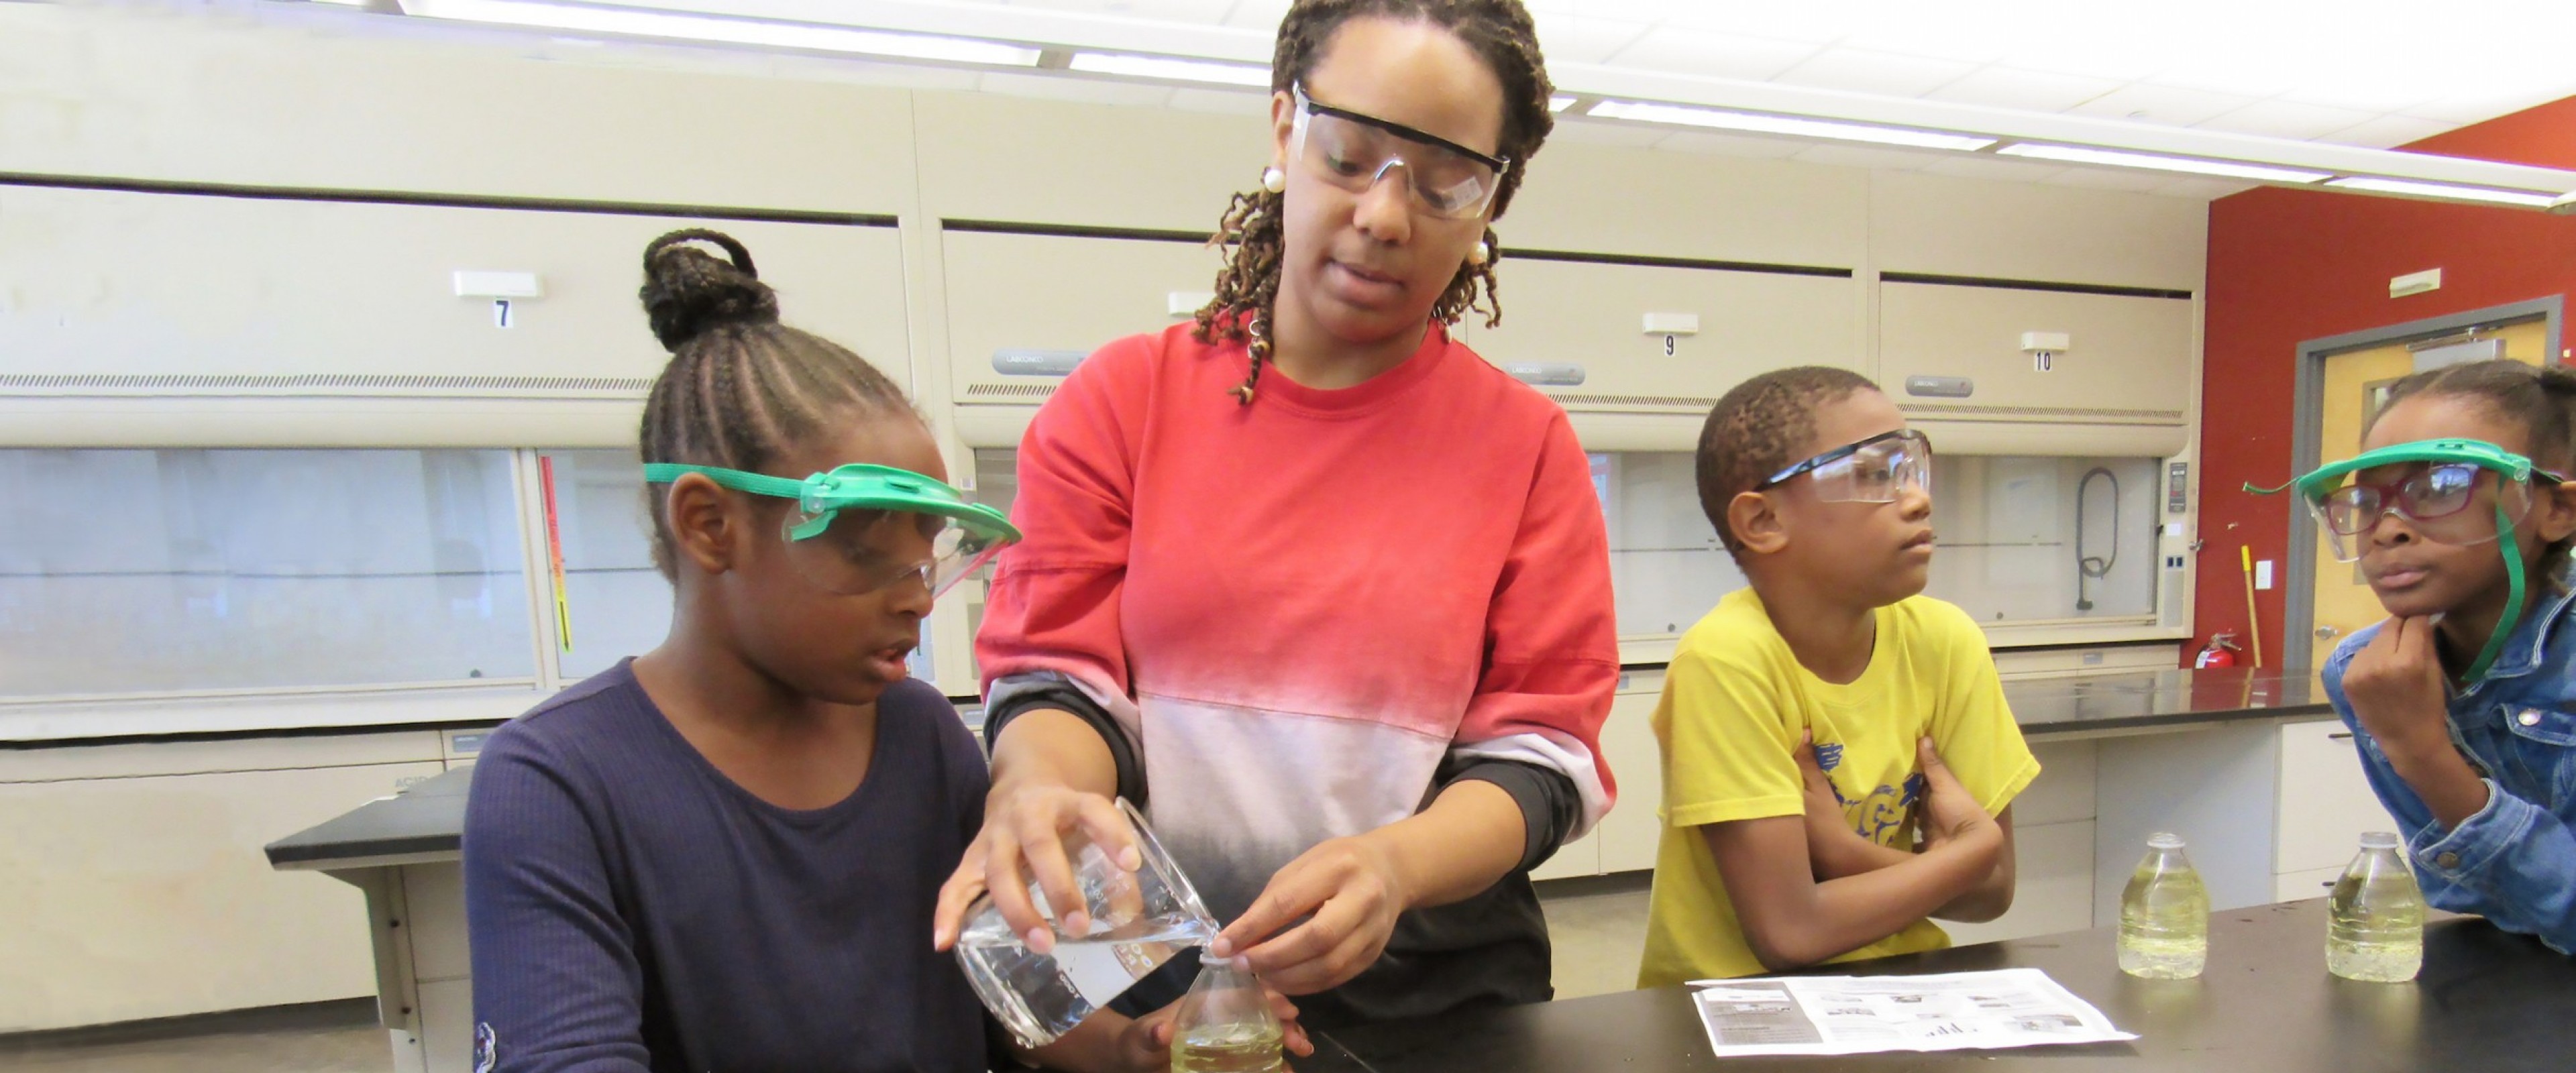 A graduate student does science experiments at a table with kids.